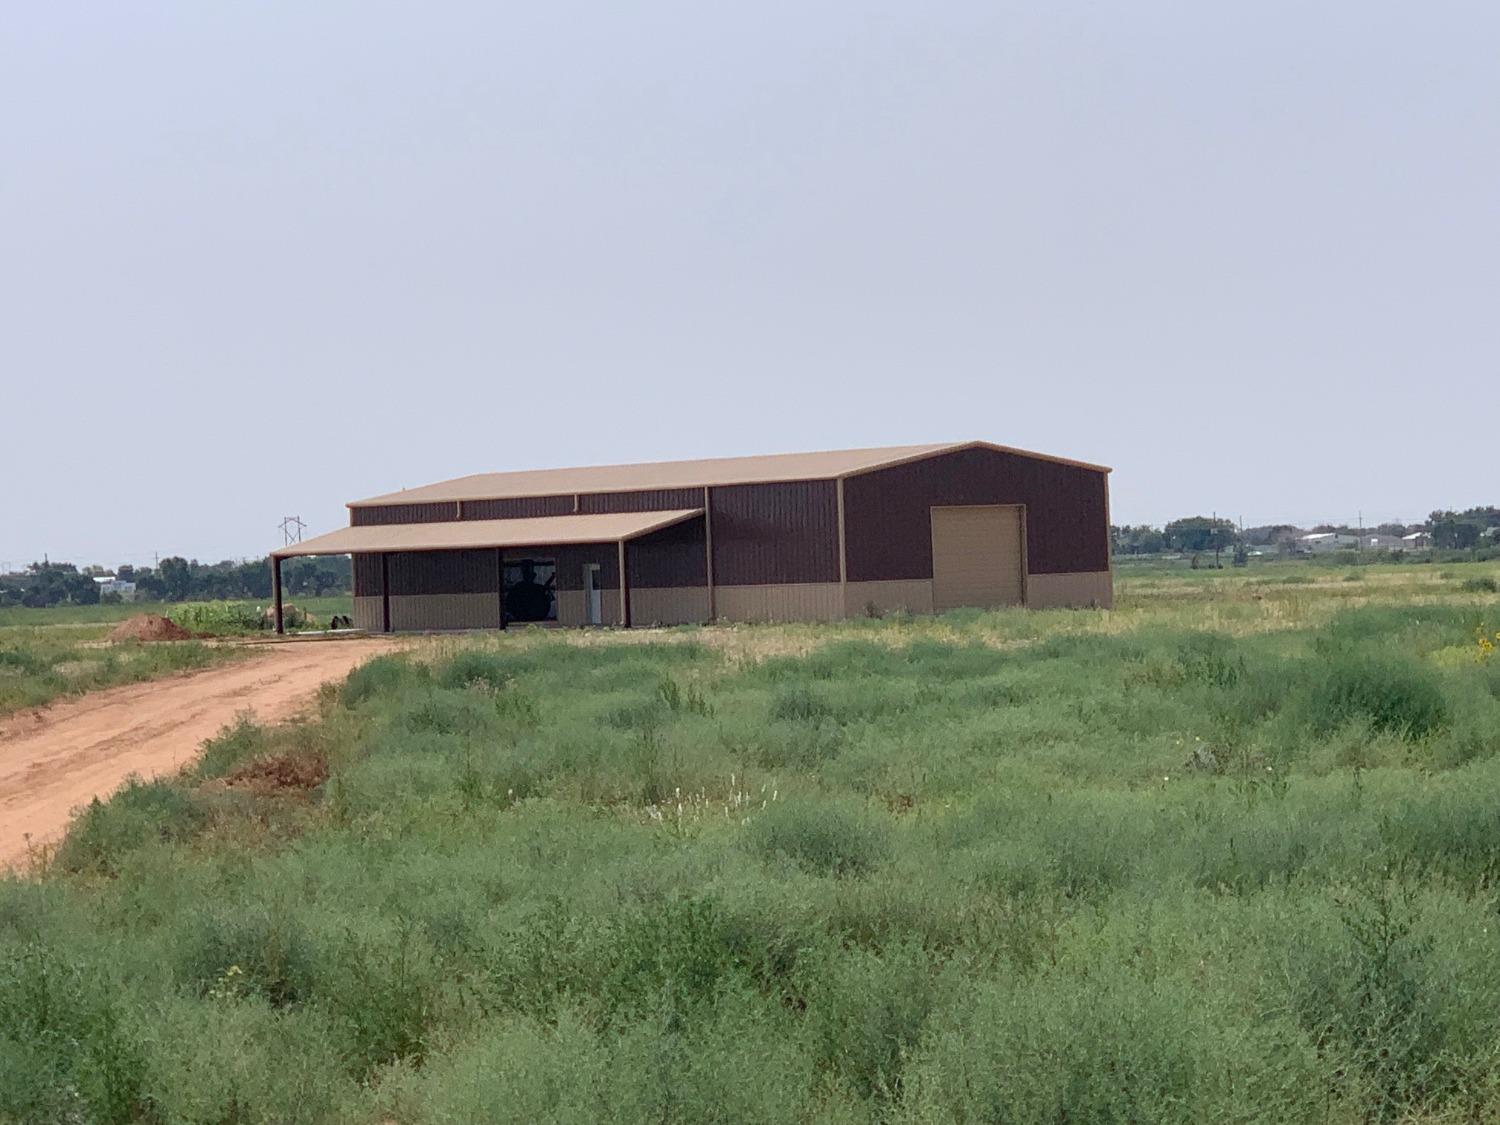 Great 40 X 100 Bandominium on 10 Acres In Shallowater. Living area is 70 x 20 with a 70 x 10 porch.  2nd bedroom is a loft could easily be made into 2 rooms.  Large master with a great shower.  Complete with stalls, pens and a chicken coop.  Barn is insulated with 2-20 foot doors